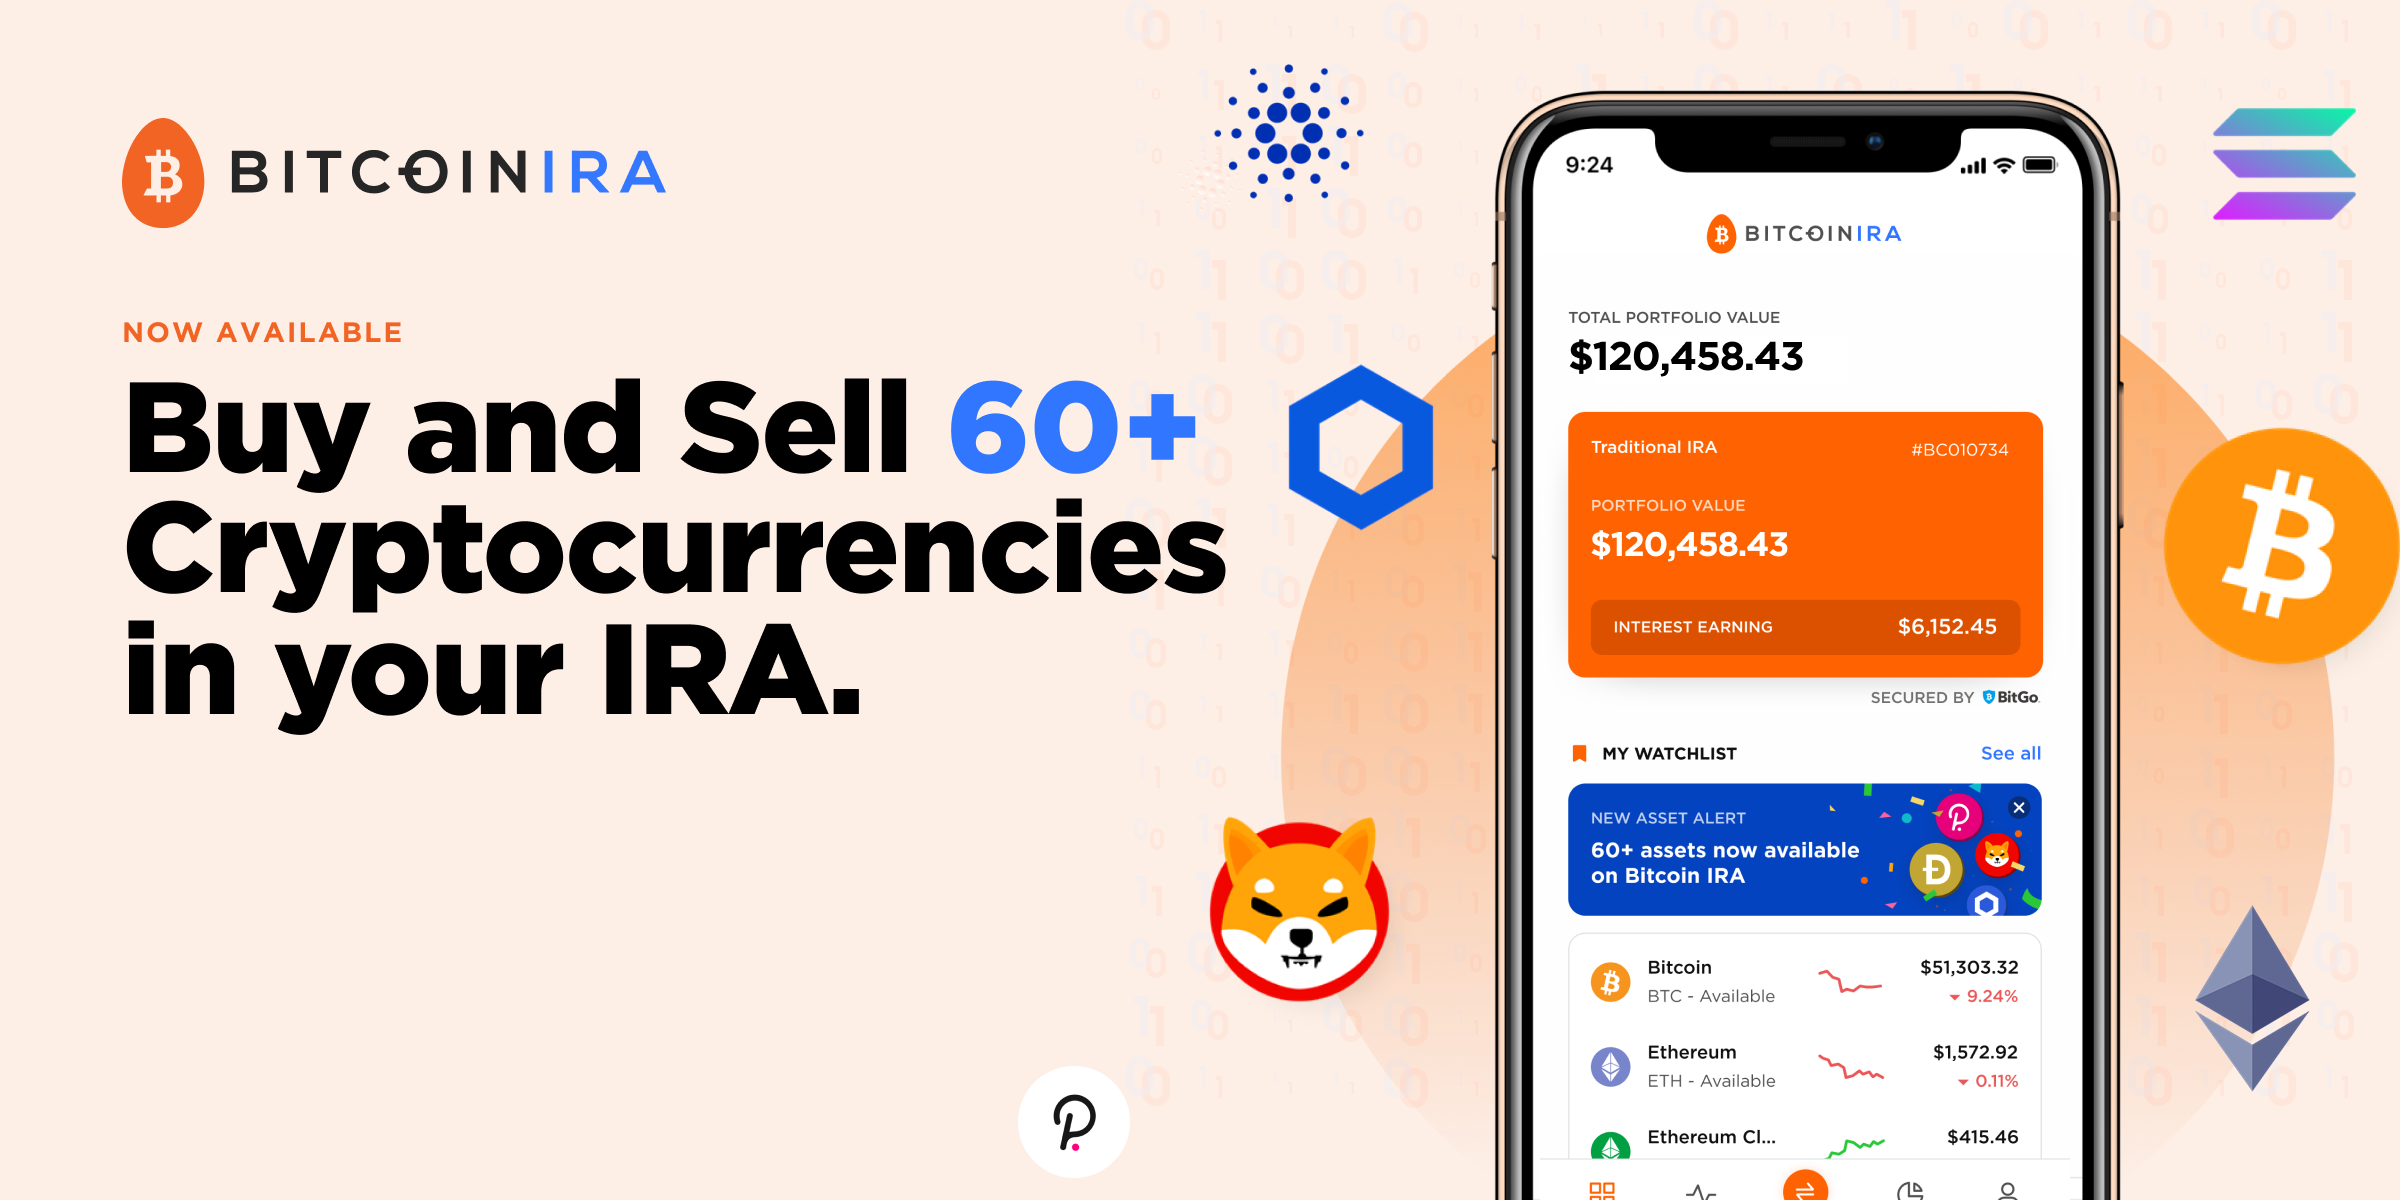 A smartphone with bitcoin ira app and crypto logos